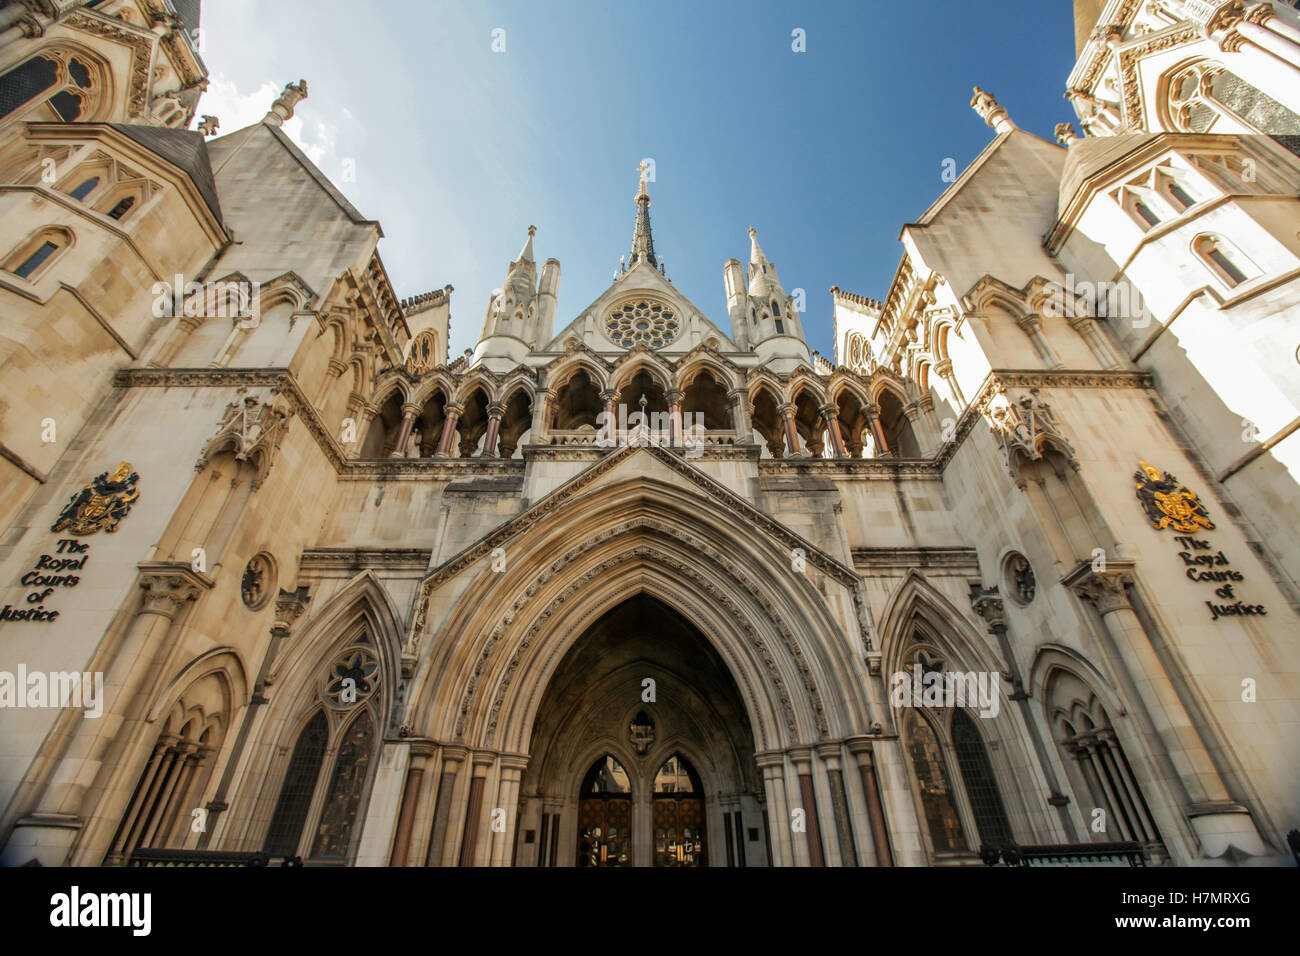 Entrance to the Royal Court of Justice, London, UK Stock Photo